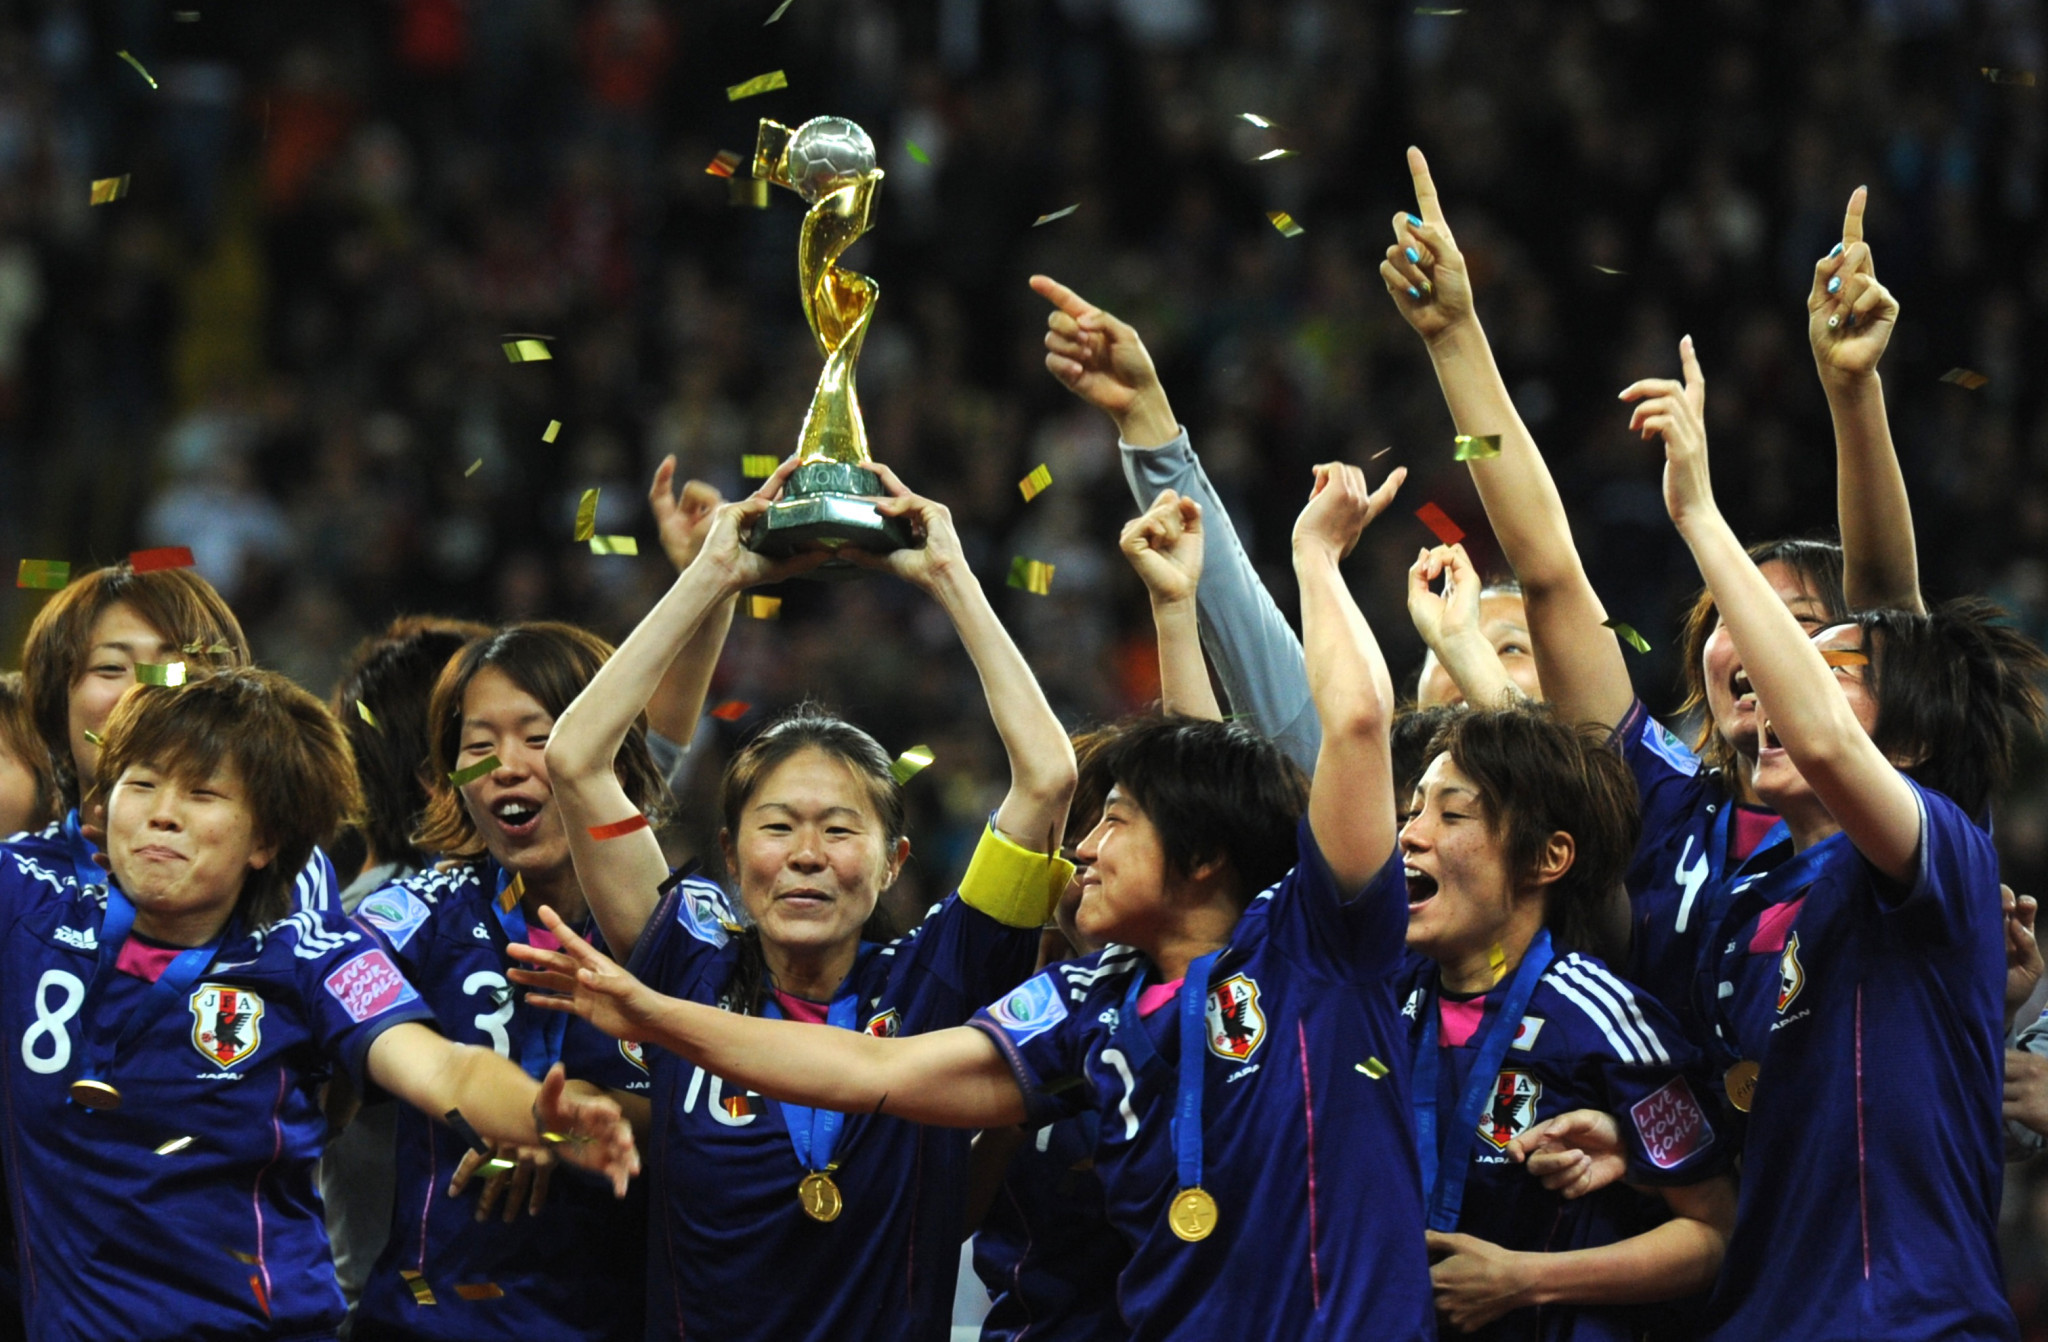 Noguchi and Women's World Cup winners tipped for key roles in Tokyo 2020 Torch Relay